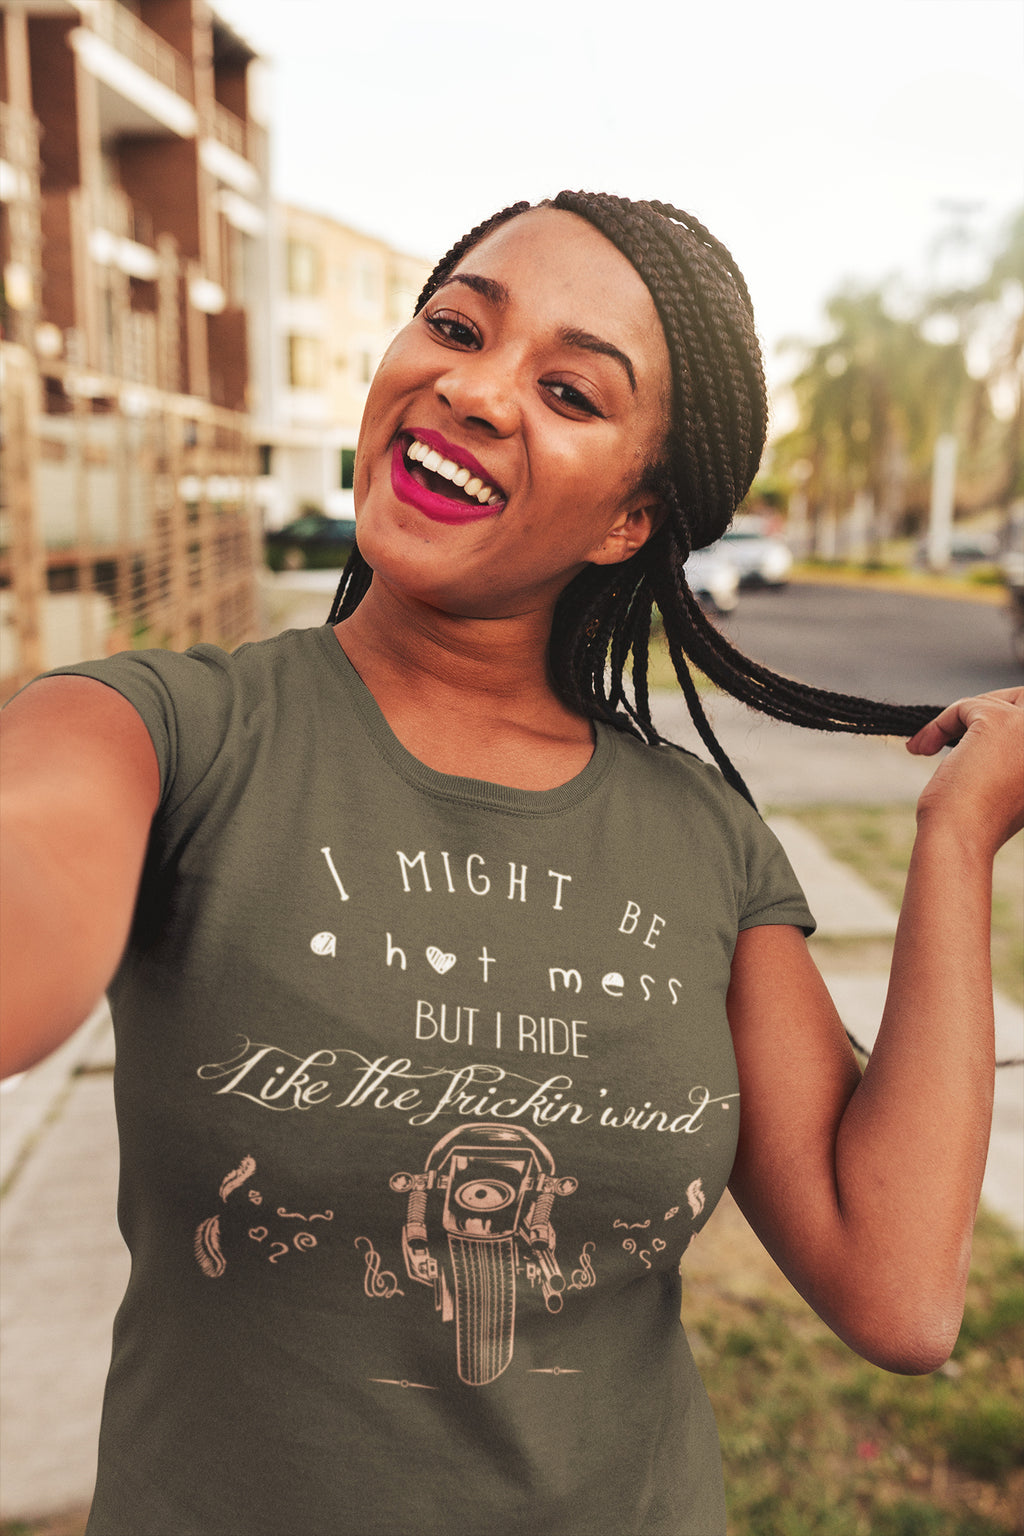 I Might Be a Hot Mess Ladies' Short Sleeve T-shirt